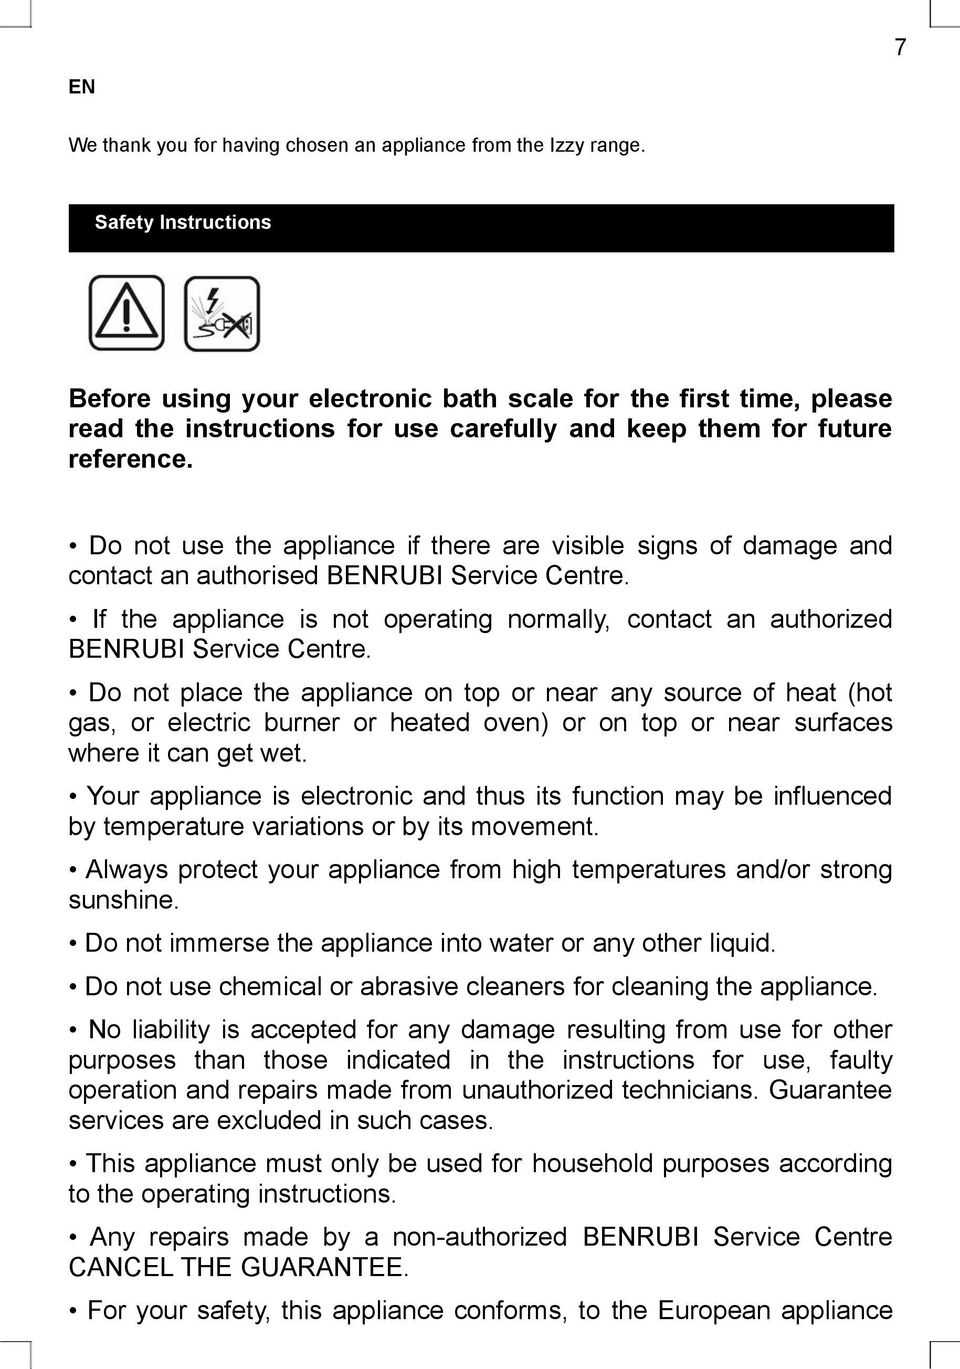 Do not use the appliance if there are visible signs of damage and contact an authorised BENRUBI Service Centre.